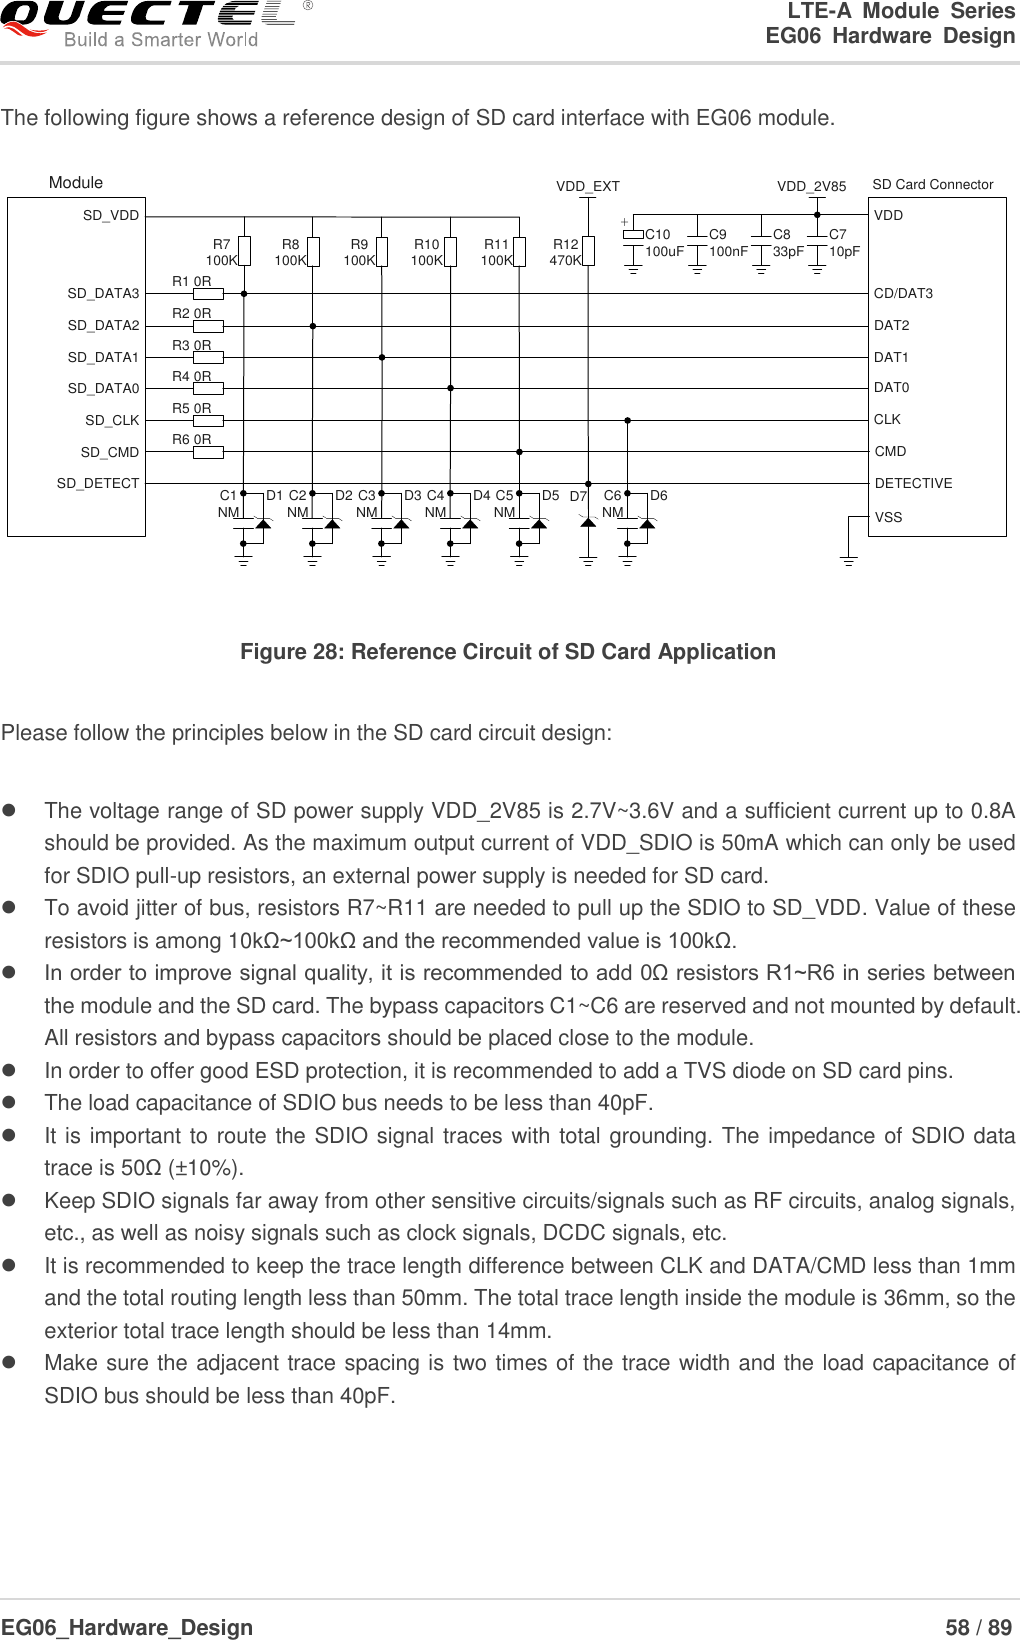 LTE-A  Module  Series                                                  EG06  Hardware  Design  EG06_Hardware_Design                                                               58 / 89    The following figure shows a reference design of SD card interface with EG06 module. SD Card ConnectorDAT2CD/DAT3CMDVDDCLKVSSDAT0DAT1DETECTIVEModuleSD_DATA3SD_DATA2SD_DATA1SD_VDDSD_DATA0SD_CLKSD_CMDSD_DETECTR1 0RR7100K R8100K R9100K R10100K R11100K R12470KVDD_EXT VDD_2V85R2 0RR3 0RR4 0RR5 0RR6 0RC2NM D2 C3NM D3 C4NM D4 C5NM D5 C6NM D6C1NM D1C710pFD7C833pFC9100nFC10100uF+ Figure 28: Reference Circuit of SD Card Application  Please follow the principles below in the SD card circuit design:    The voltage range of SD power supply VDD_2V85 is 2.7V~3.6V and a sufficient current up to 0.8A should be provided. As the maximum output current of VDD_SDIO is 50mA which can only be used for SDIO pull-up resistors, an external power supply is needed for SD card.   To avoid jitter of bus, resistors R7~R11 are needed to pull up the SDIO to SD_VDD. Value of these resistors is among 10kΩ~100kΩ and the recommended value is 100kΩ.    In order to improve signal quality, it is recommended to add 0Ω resistors R1~R6 in series between the module and the SD card. The bypass capacitors C1~C6 are reserved and not mounted by default. All resistors and bypass capacitors should be placed close to the module.   In order to offer good ESD protection, it is recommended to add a TVS diode on SD card pins.   The load capacitance of SDIO bus needs to be less than 40pF.   It is important to route the SDIO signal traces with total grounding. The impedance of SDIO data trace is 50Ω (±10%).   Keep SDIO signals far away from other sensitive circuits/signals such as RF circuits, analog signals, etc., as well as noisy signals such as clock signals, DCDC signals, etc.   It is recommended to keep the trace length difference between CLK and DATA/CMD less than 1mm and the total routing length less than 50mm. The total trace length inside the module is 36mm, so the exterior total trace length should be less than 14mm.   Make sure the adjacent trace spacing is two times of the trace width and the load capacitance of SDIO bus should be less than 40pF.    